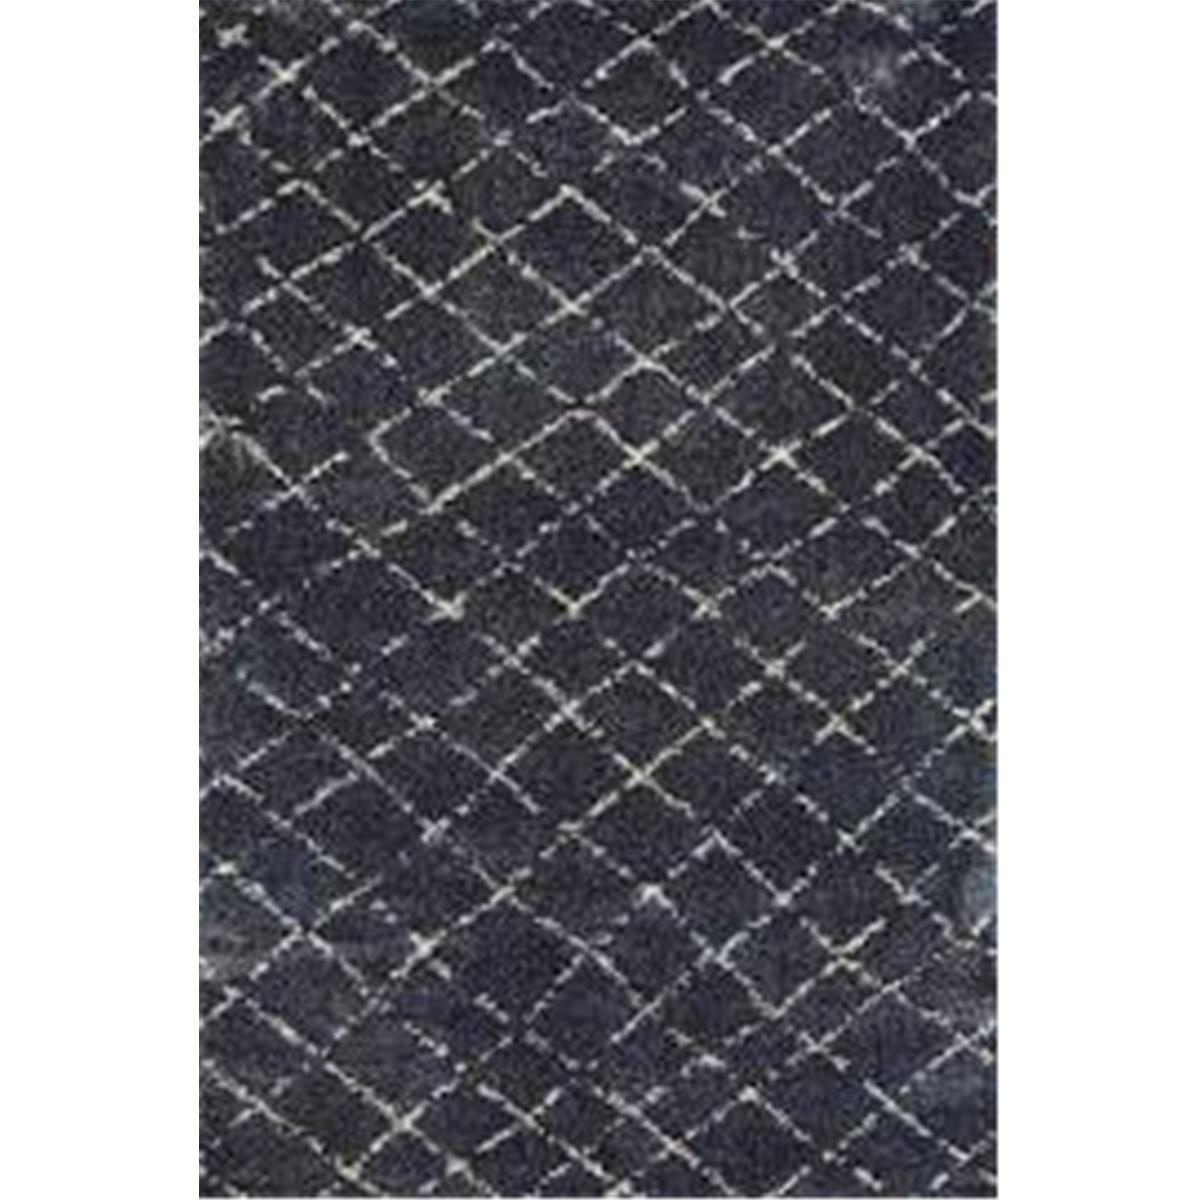 43317459092129t 9 Ft. 2 In. X 12 Ft. 9 In. Bromley Gio Rug, Navy & Grey